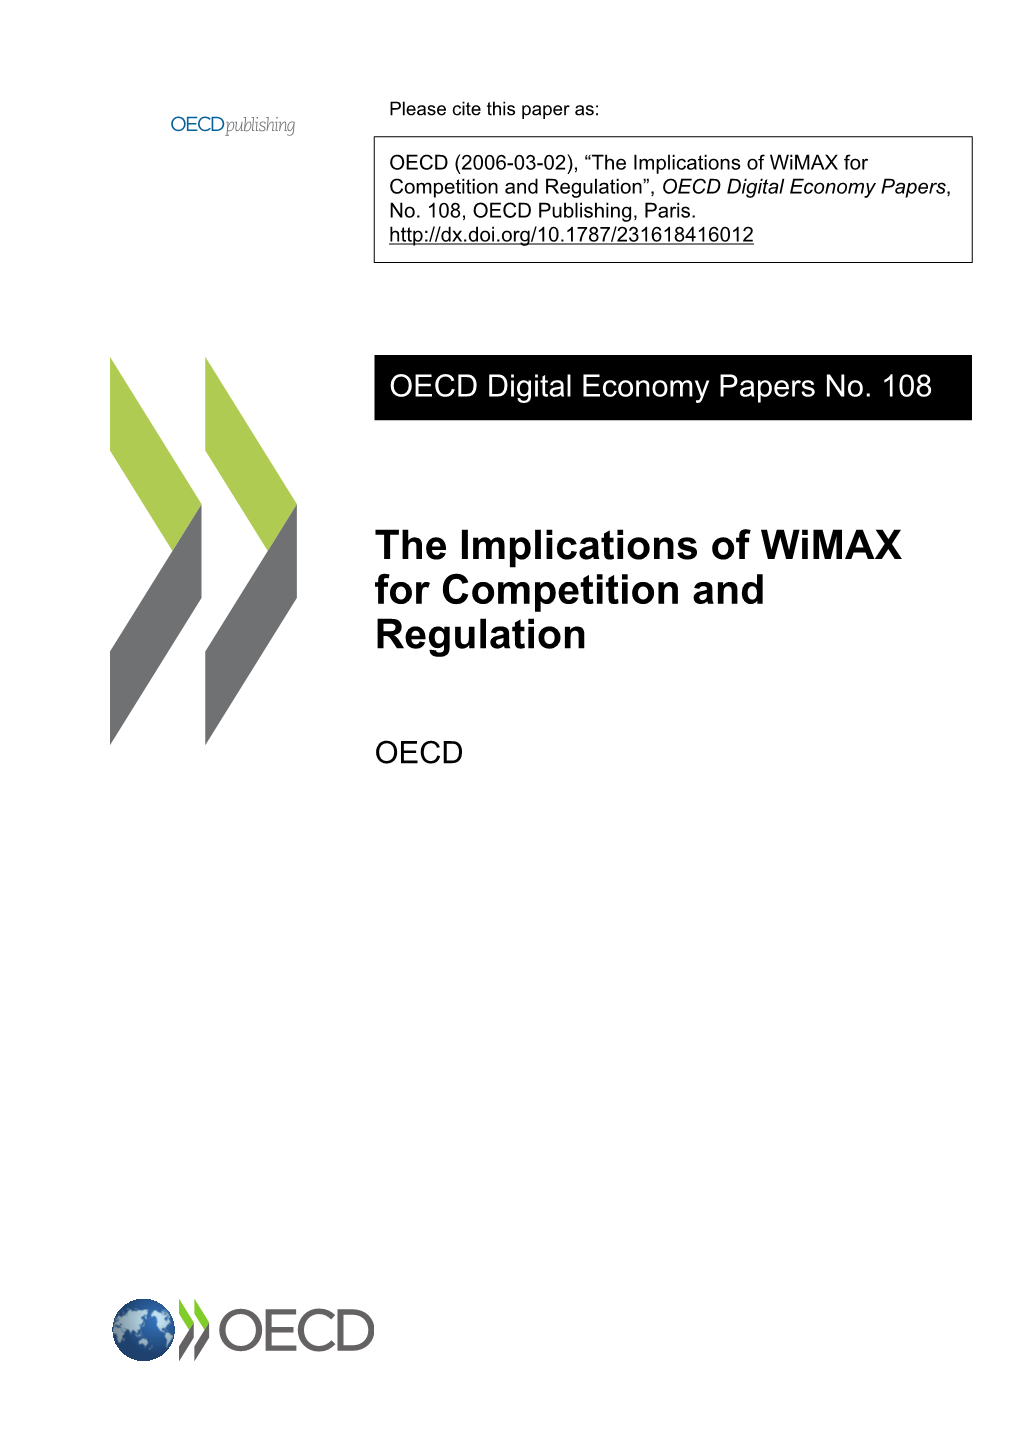 The Implications of Wimax for Competition and Regulation”, OECD Digital Economy Papers, No